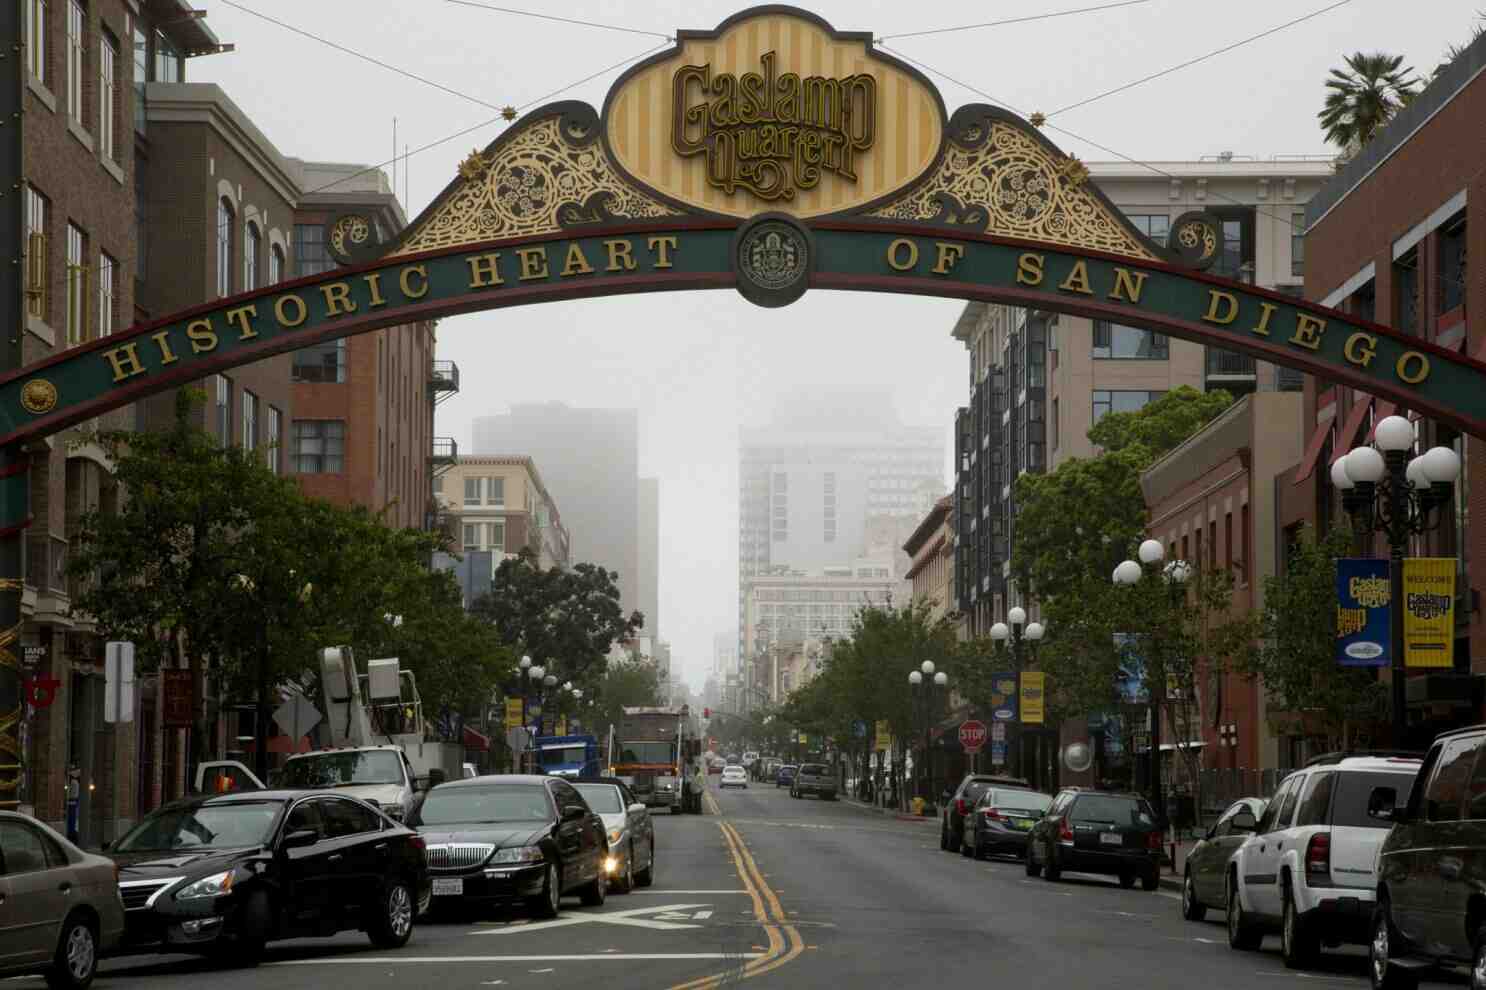 Is San Diego Gaslamp District safe at night?